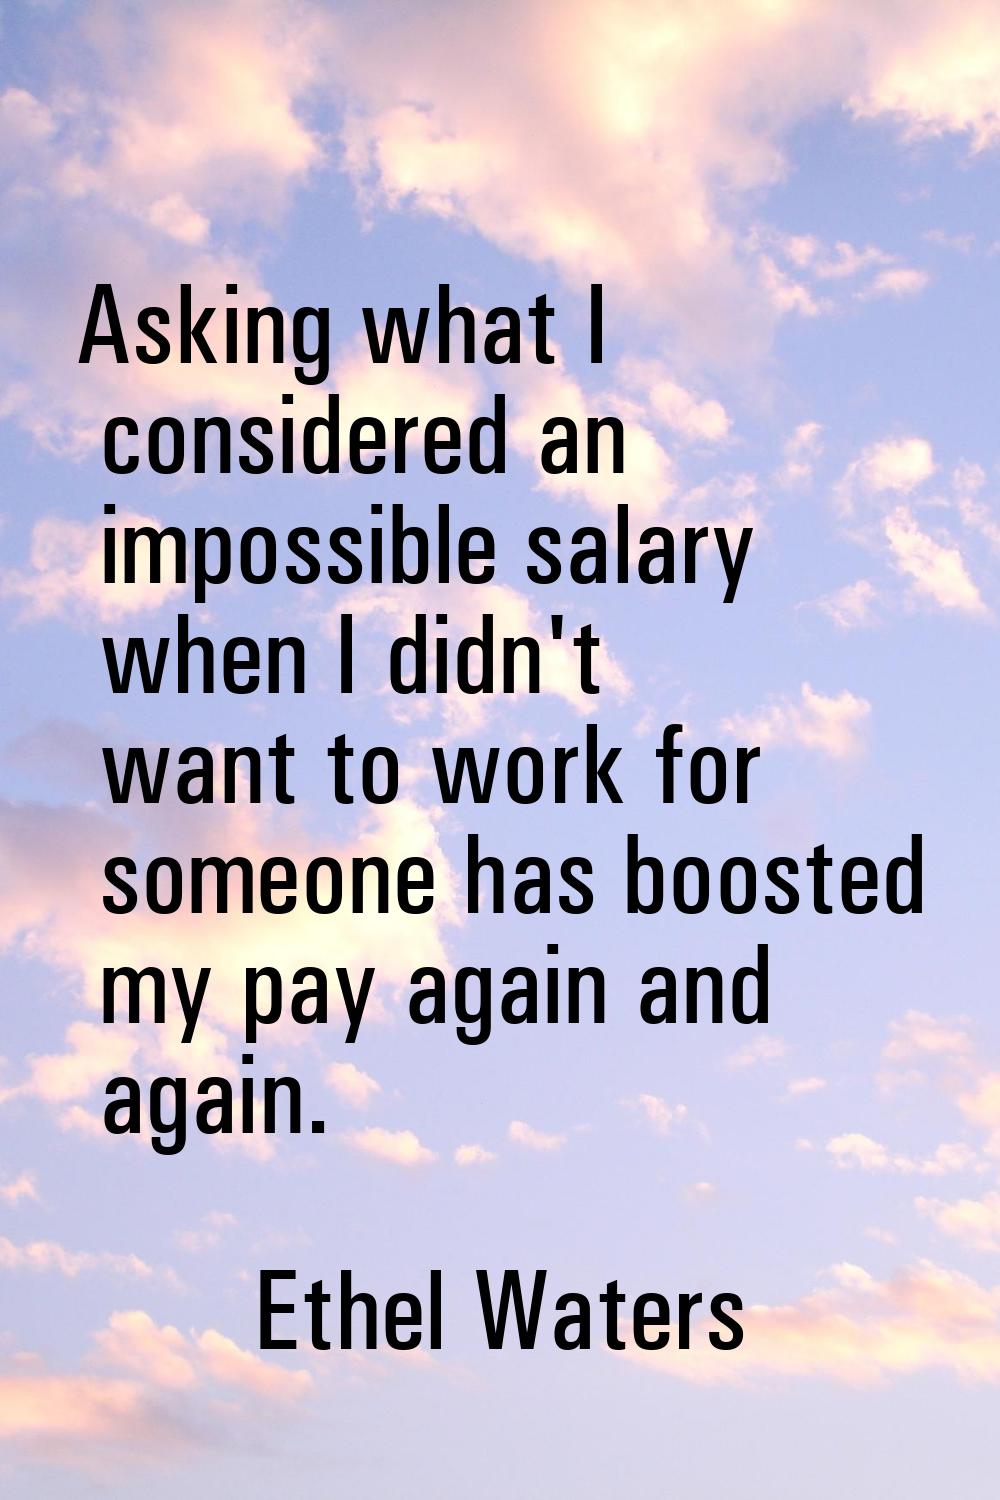 Asking what I considered an impossible salary when I didn't want to work for someone has boosted my